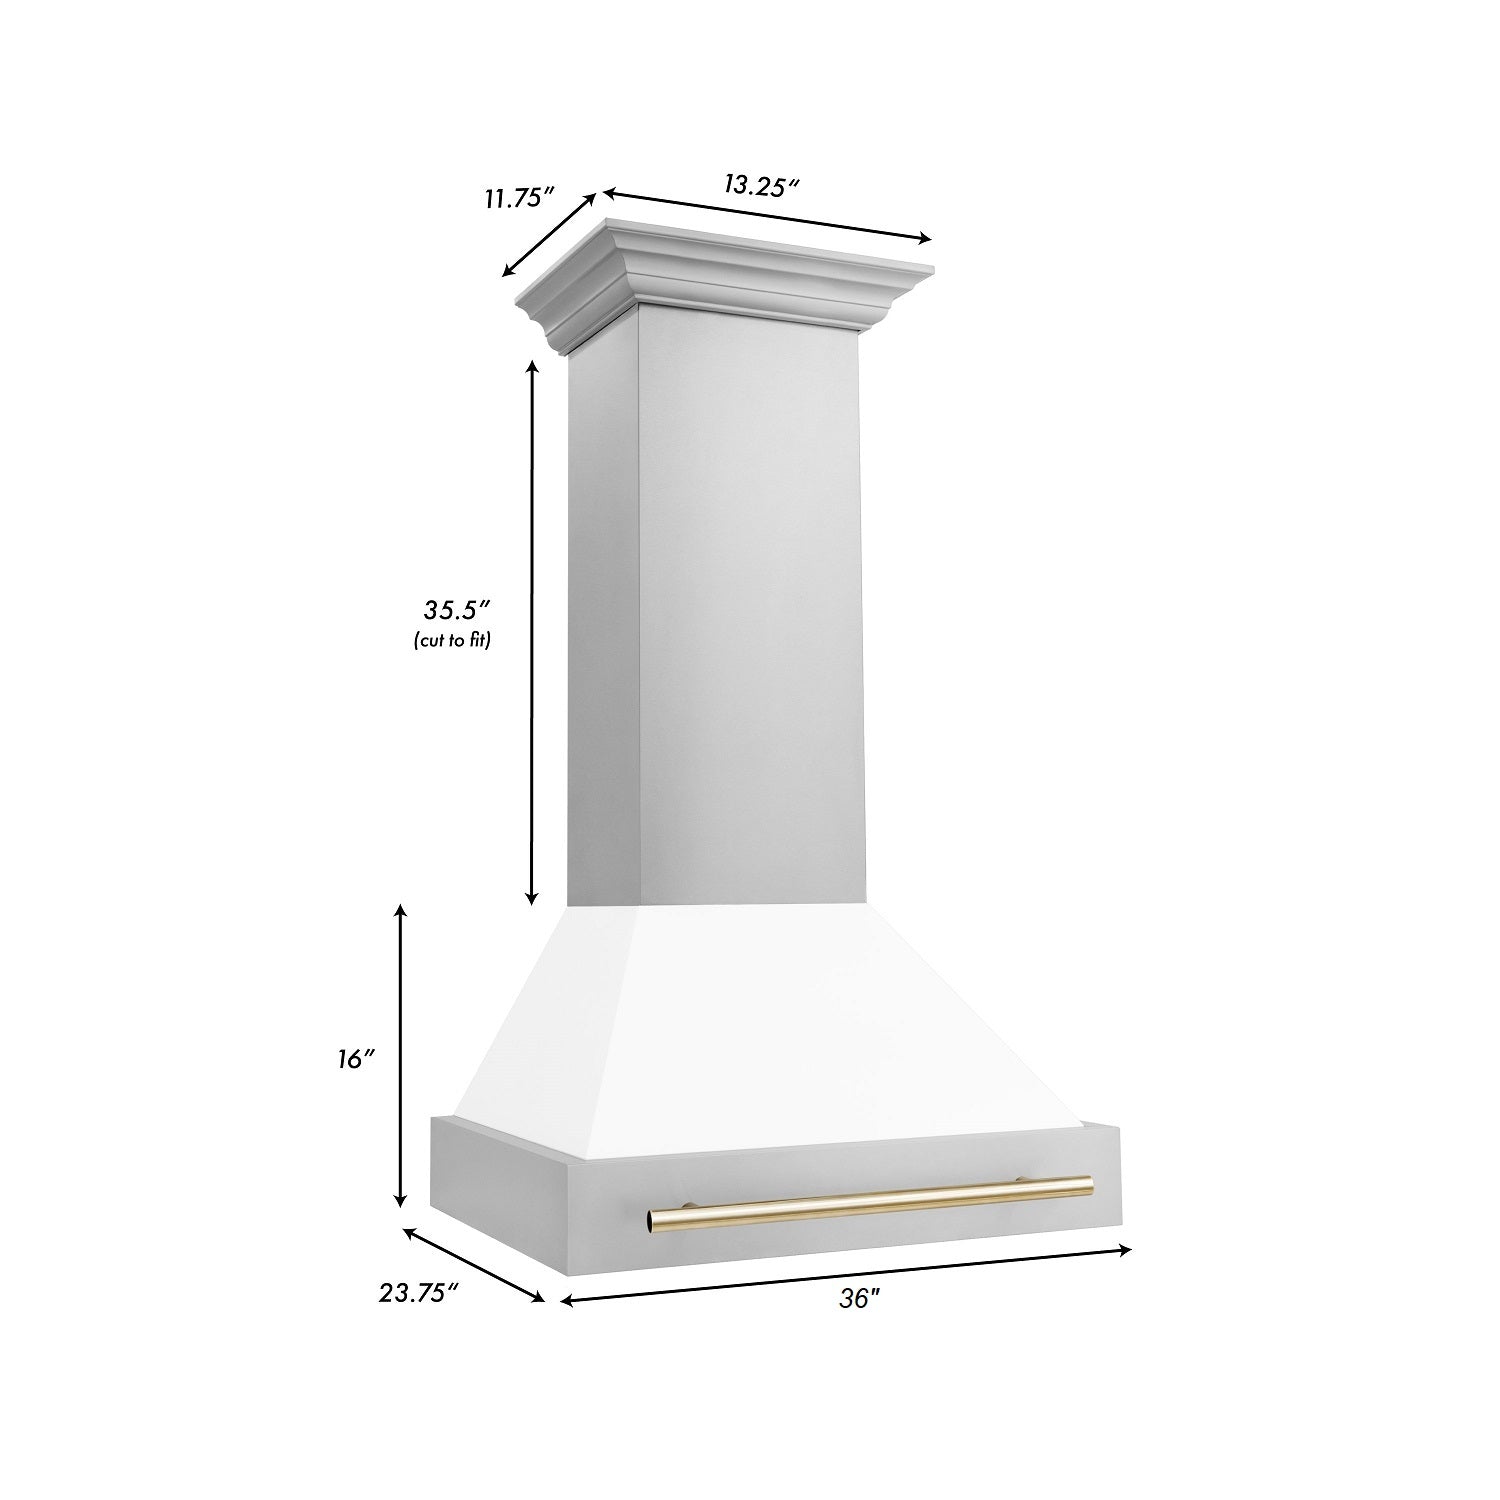 ZLINE 36 Autograph Edition Stainless Steel Range Hood with Stainless Steel Shell and Gold Handle (8654STZ-36-G)